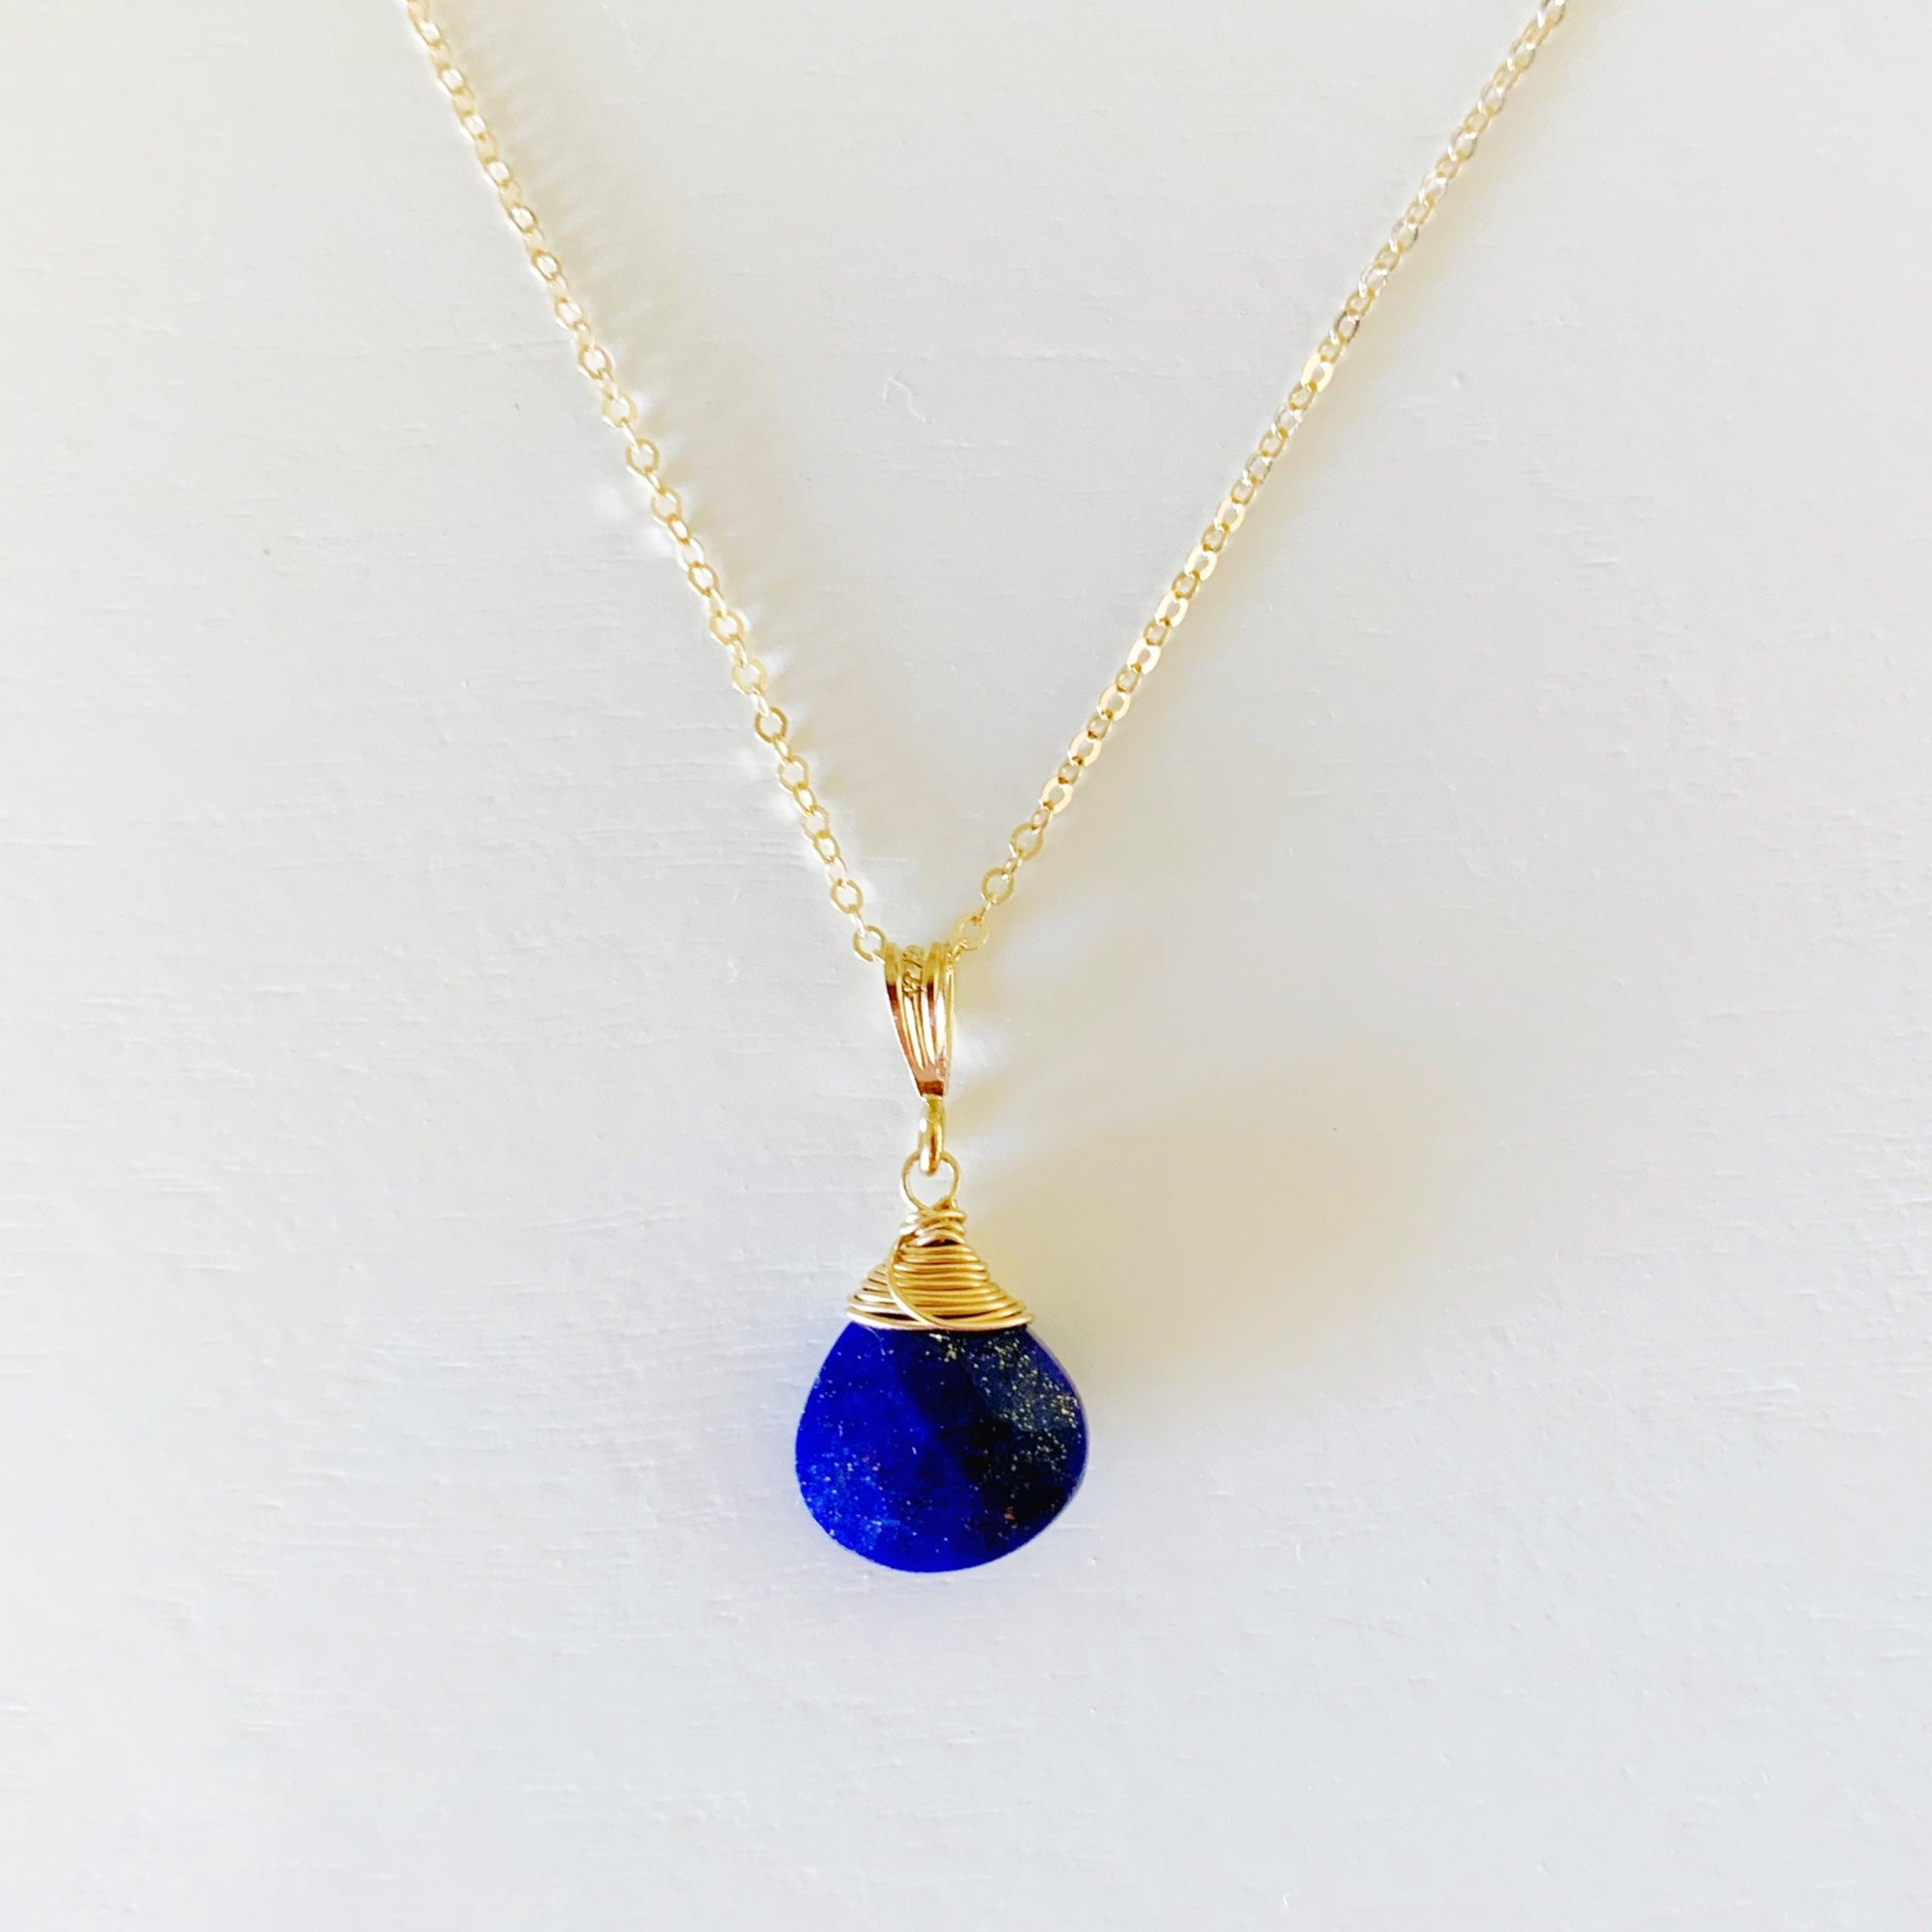 The Neptune pendant necklace by mermaids and madeleines is designed with lapis and 14k gold filled findings and chain. This necklace is photographed on a white surface